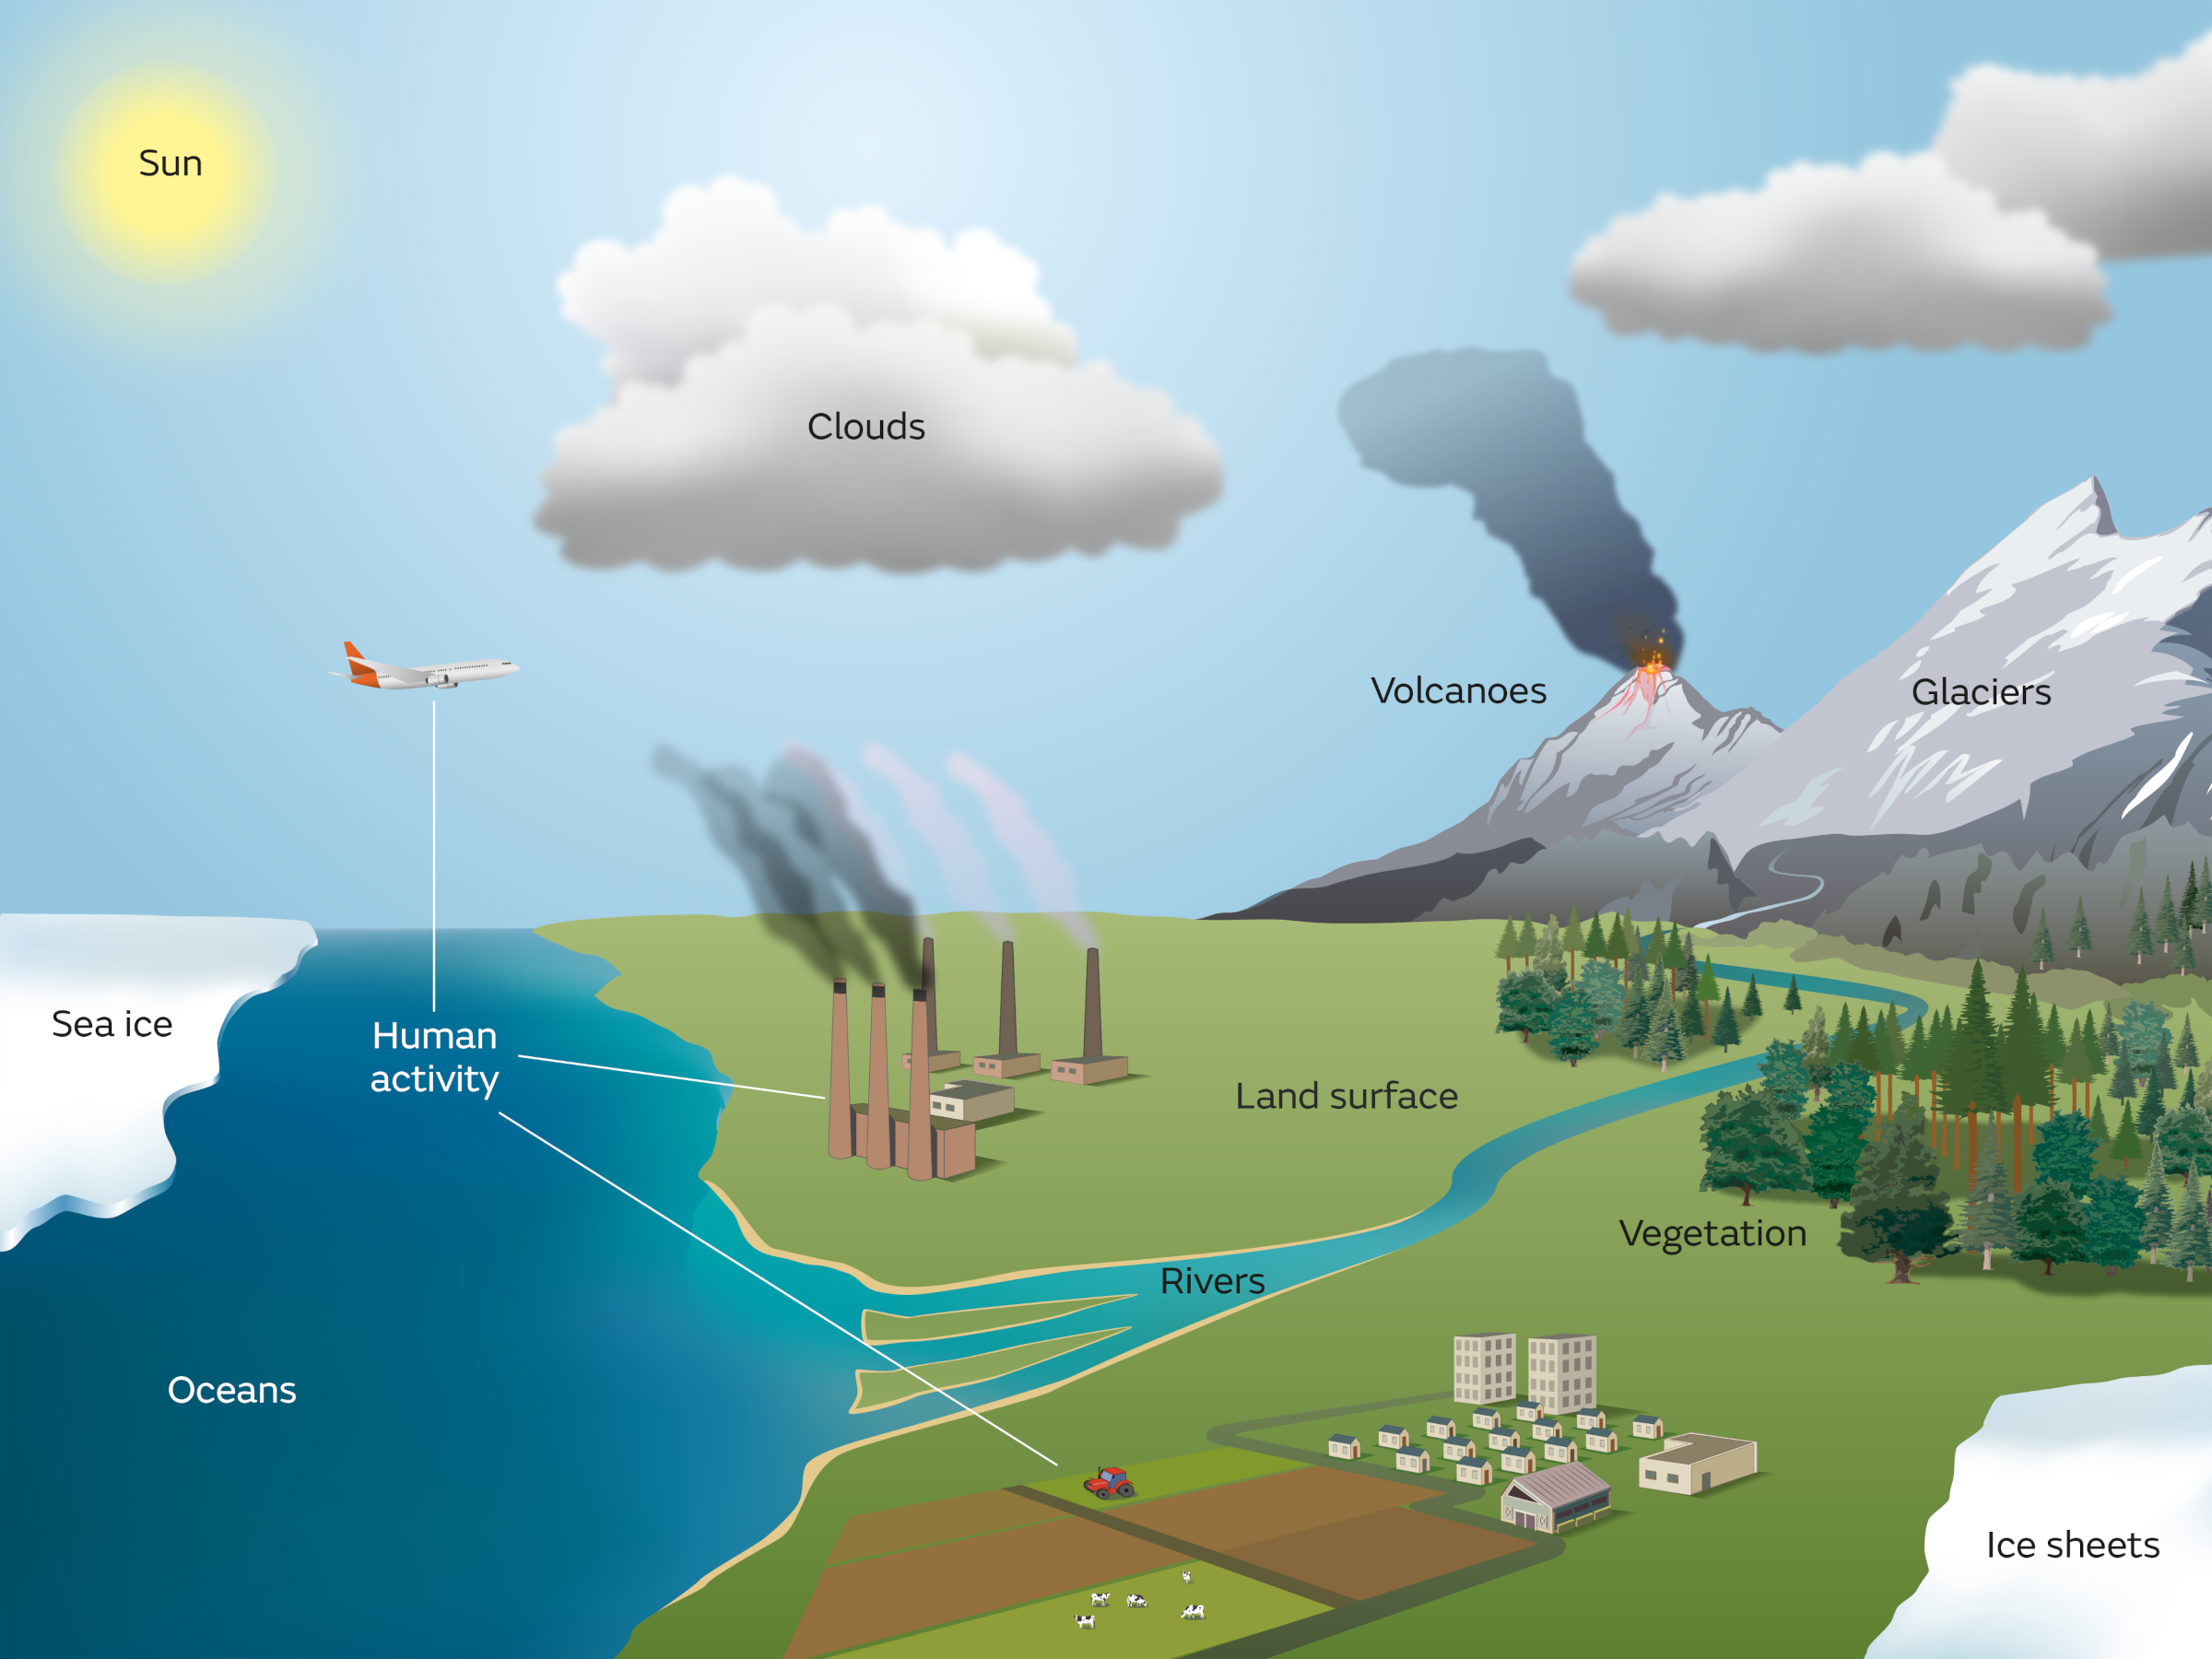 Components of the climate system, including the Sun, clouds, volcanoes, glaciers, ice sheets, sea ice, oceans, rivers, the land surface, vegetation and human activity.